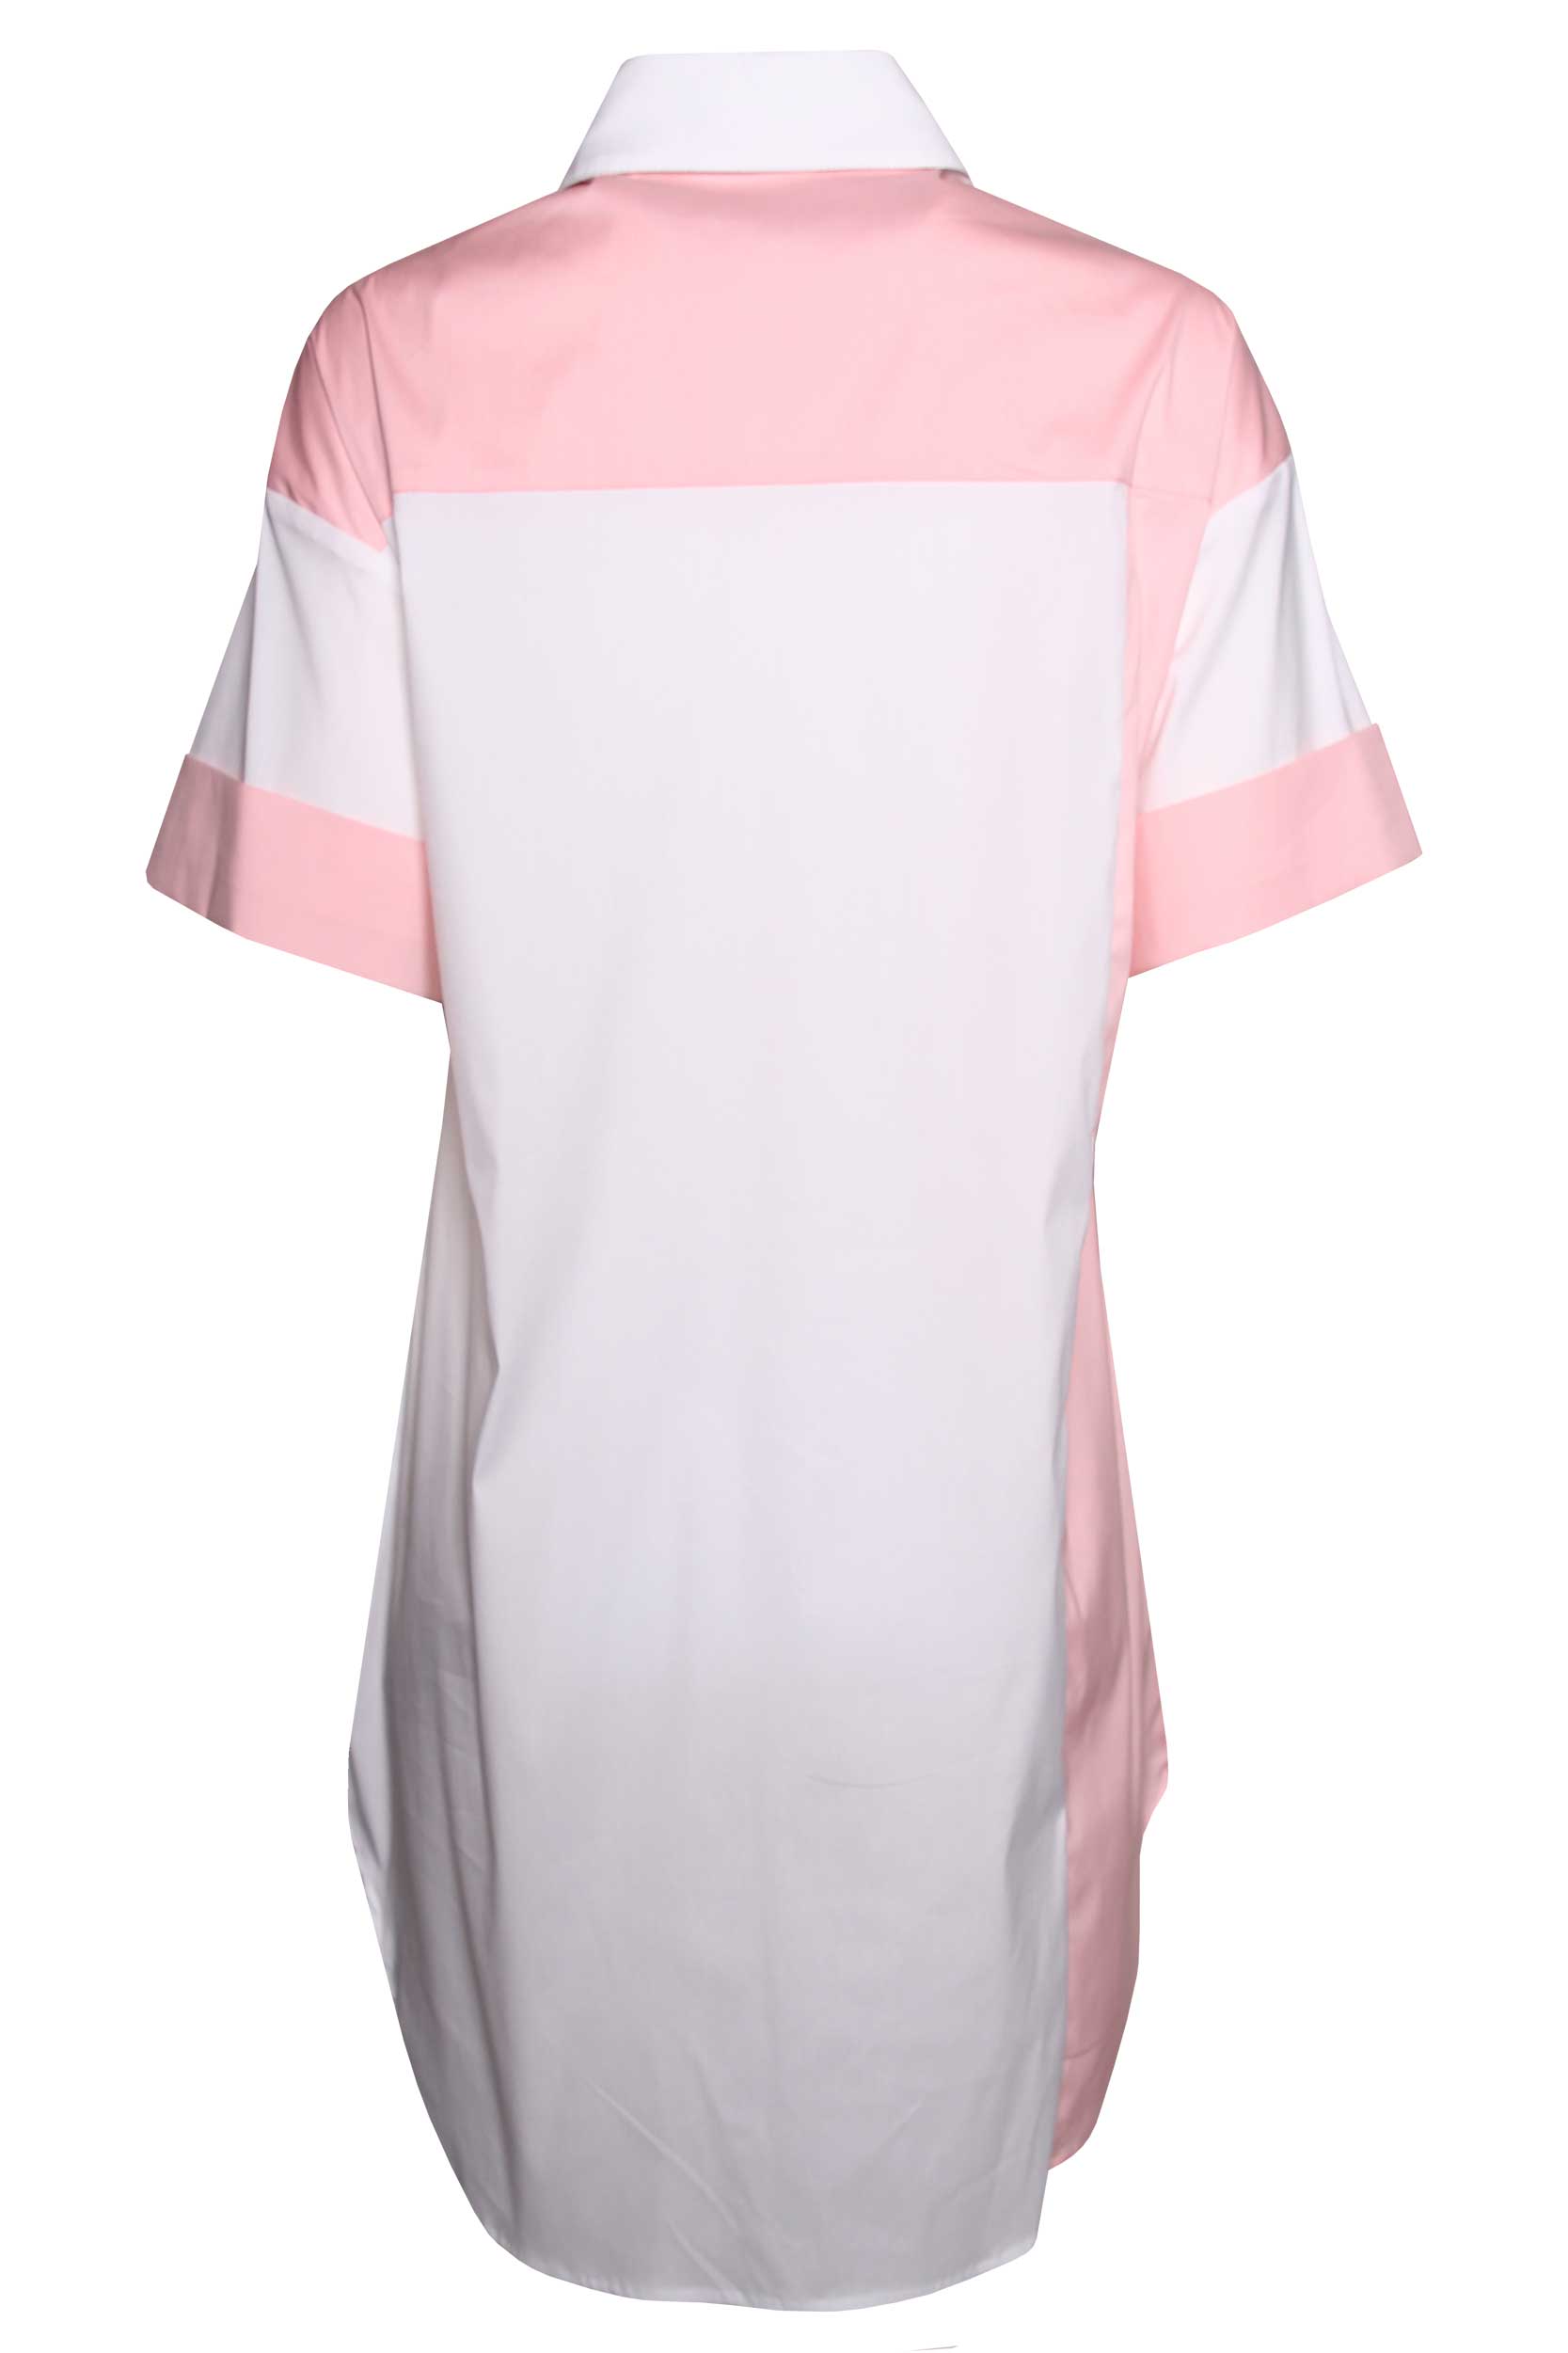 le2101546-pink-1-